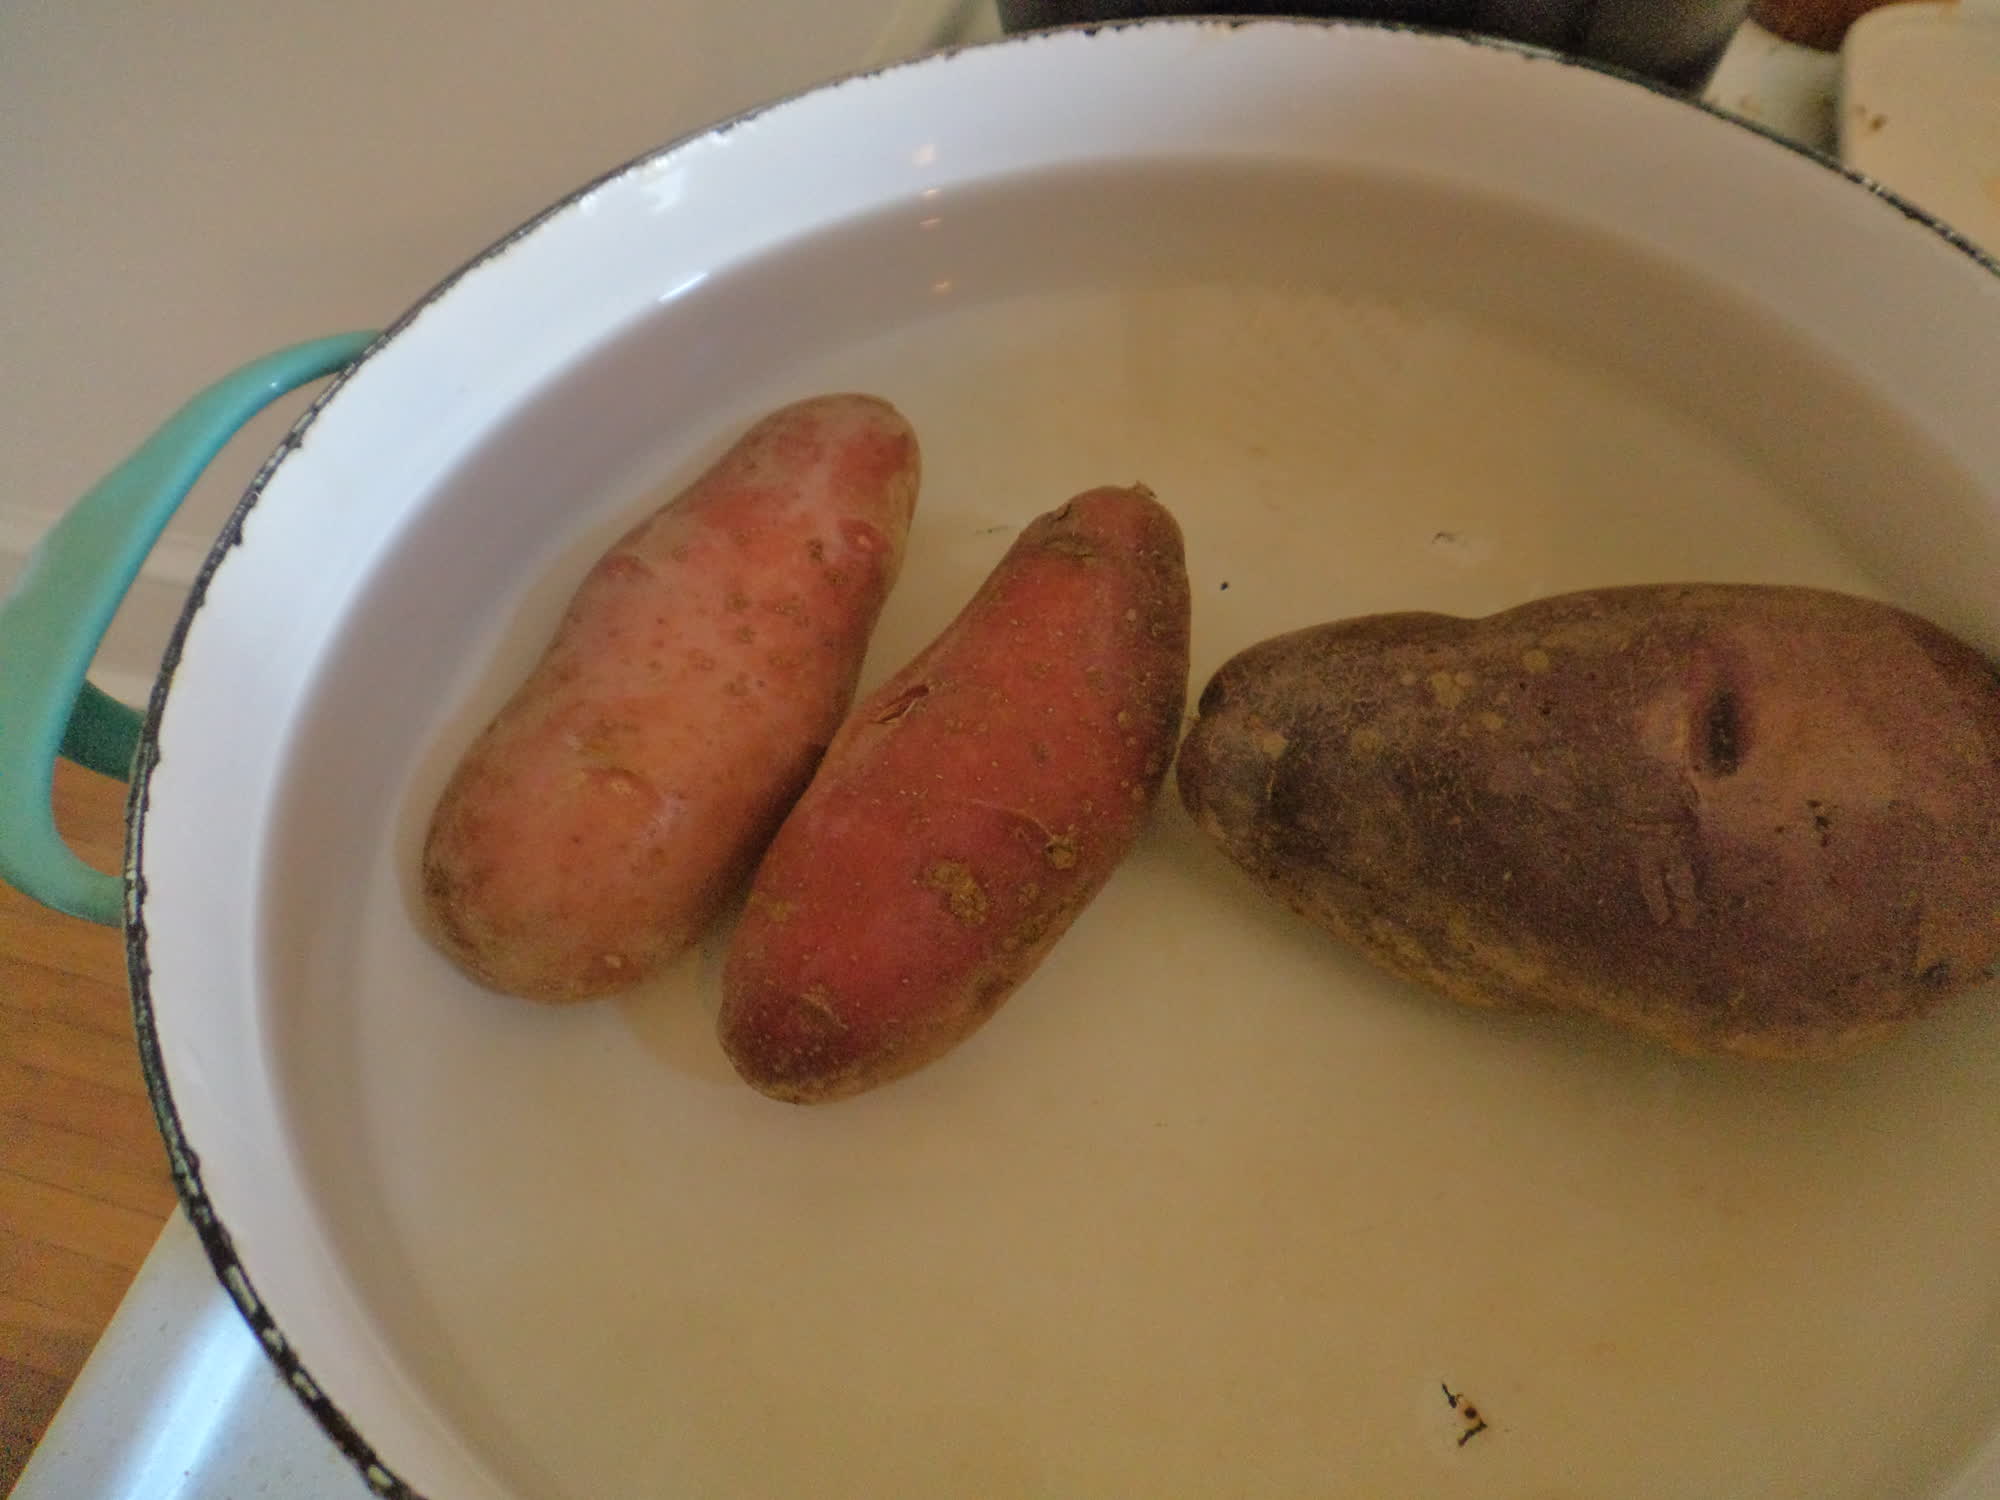  3 colors of potatoes from the farmer's market